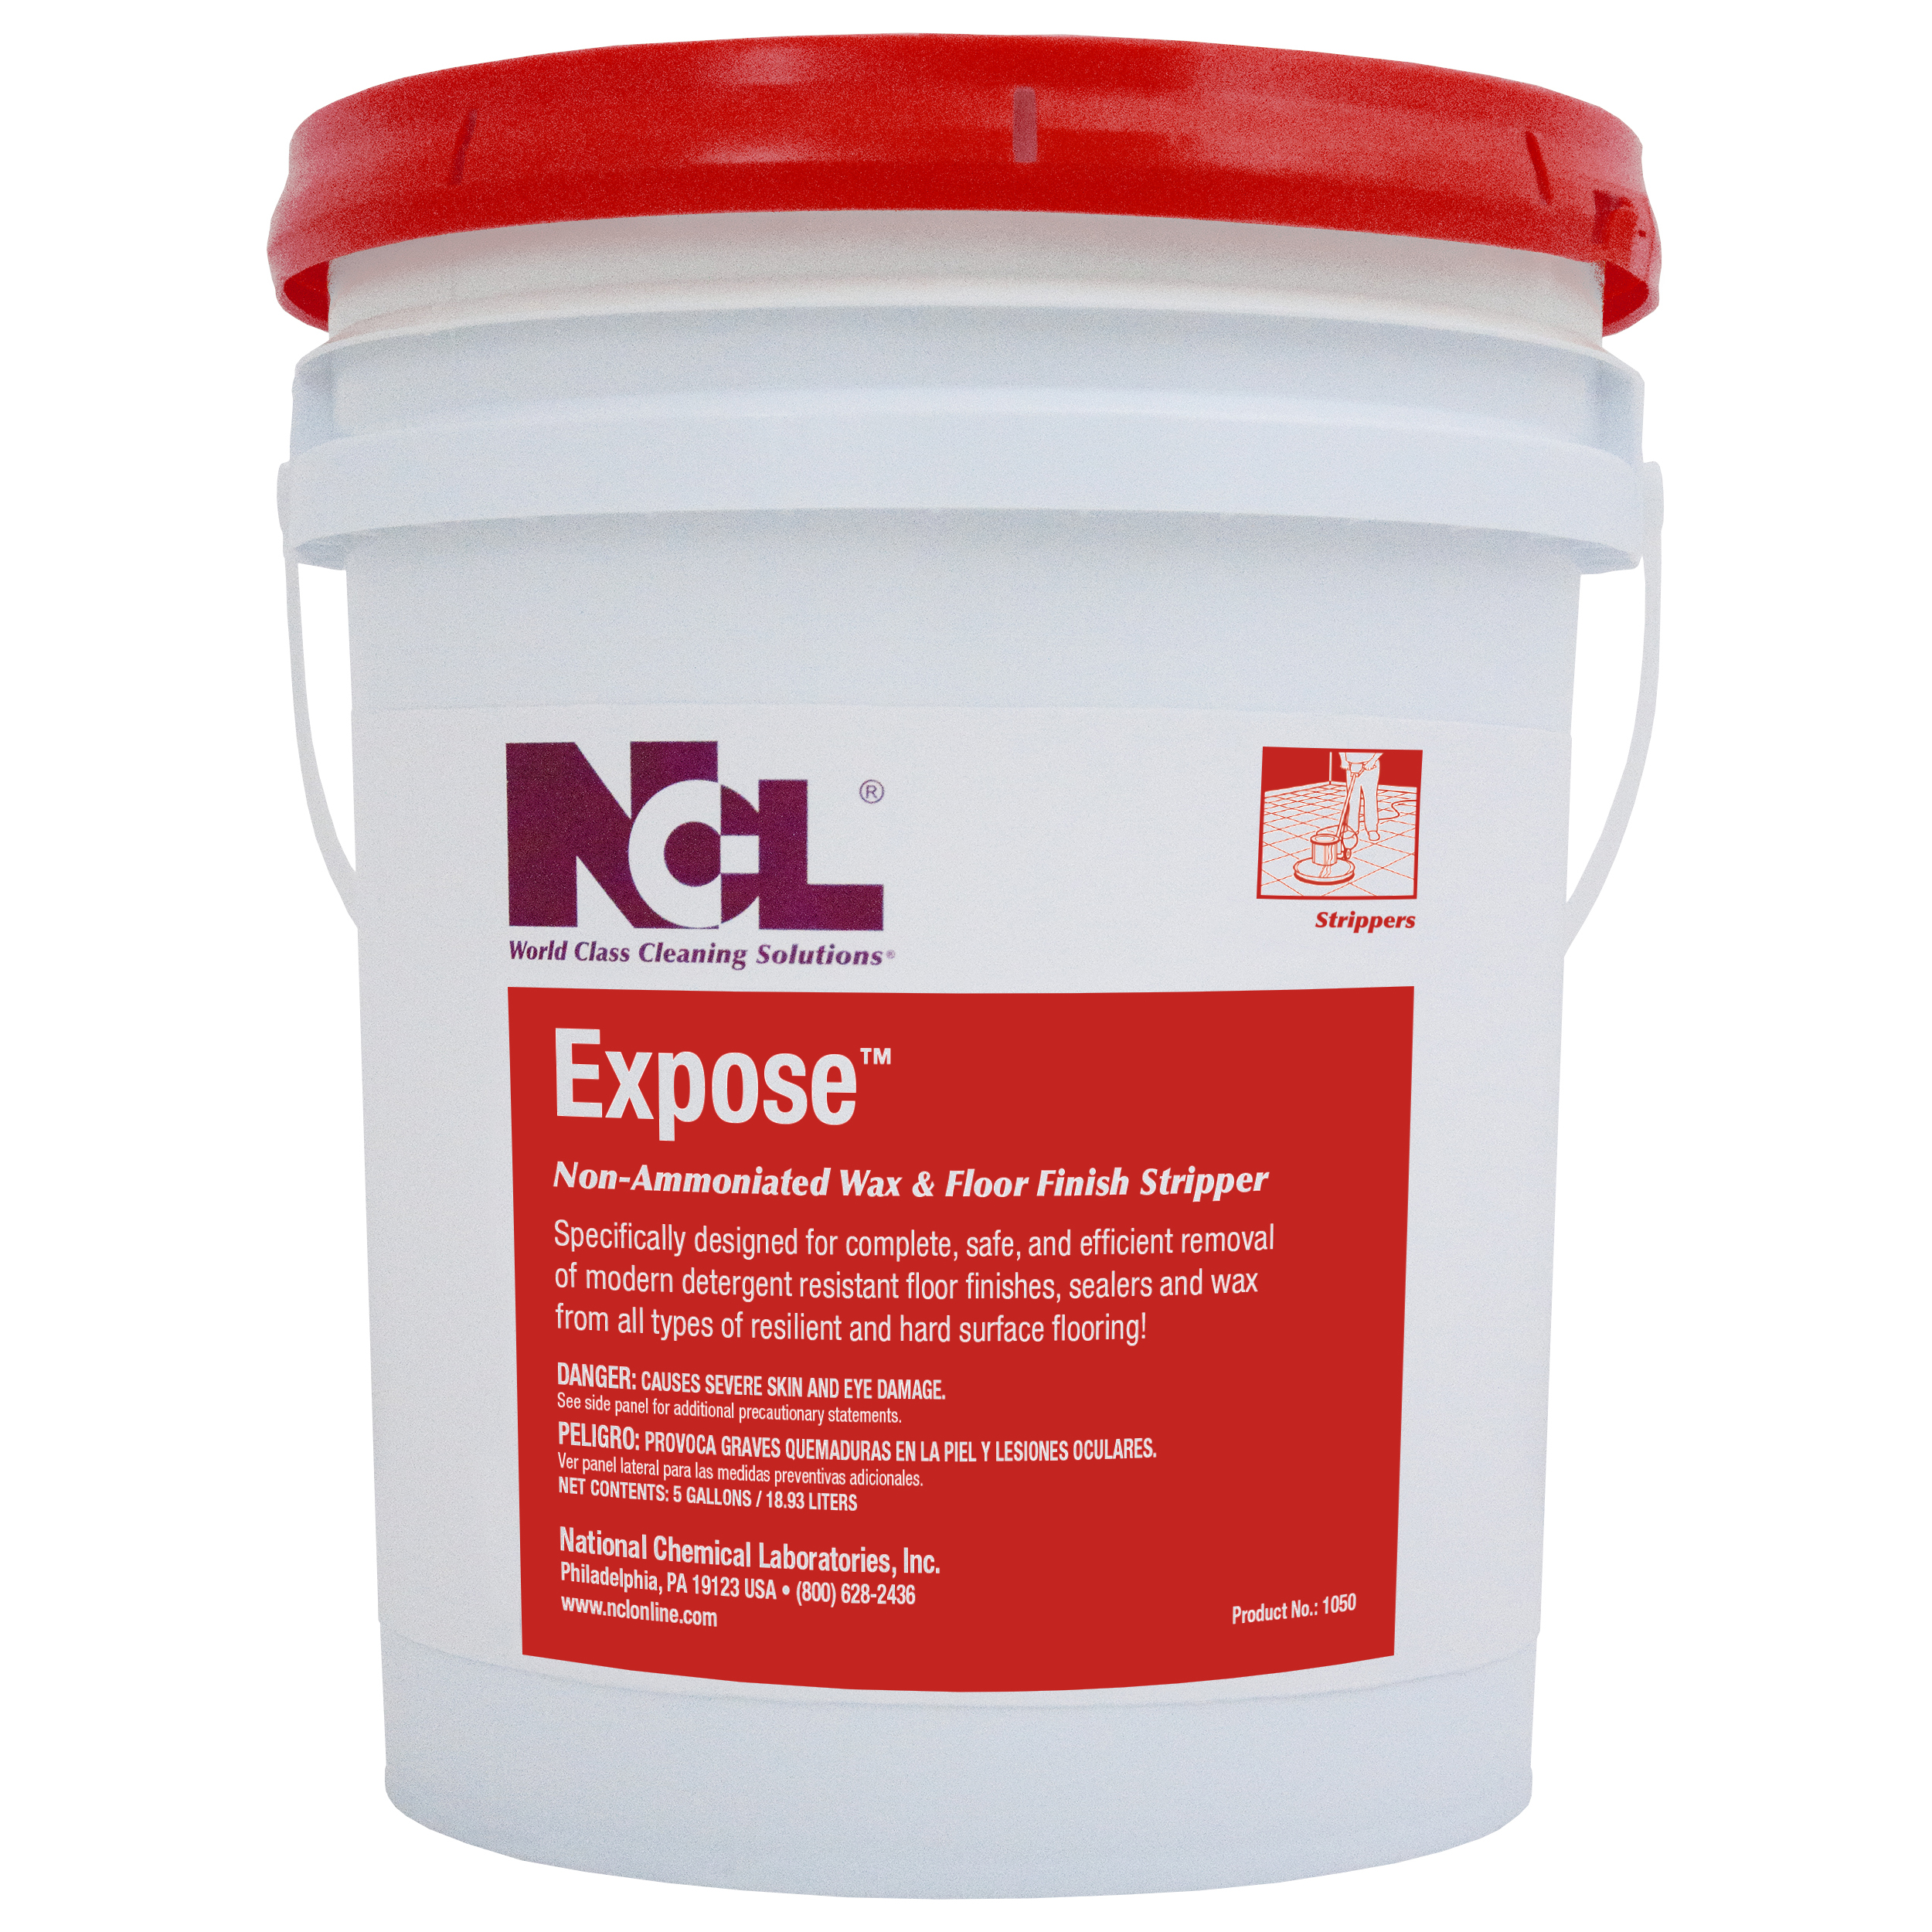  EXPOSE Non-Ammoniated Wax and Floor Finish Stripper 5 Gal. Pail (NCL1050-20) 